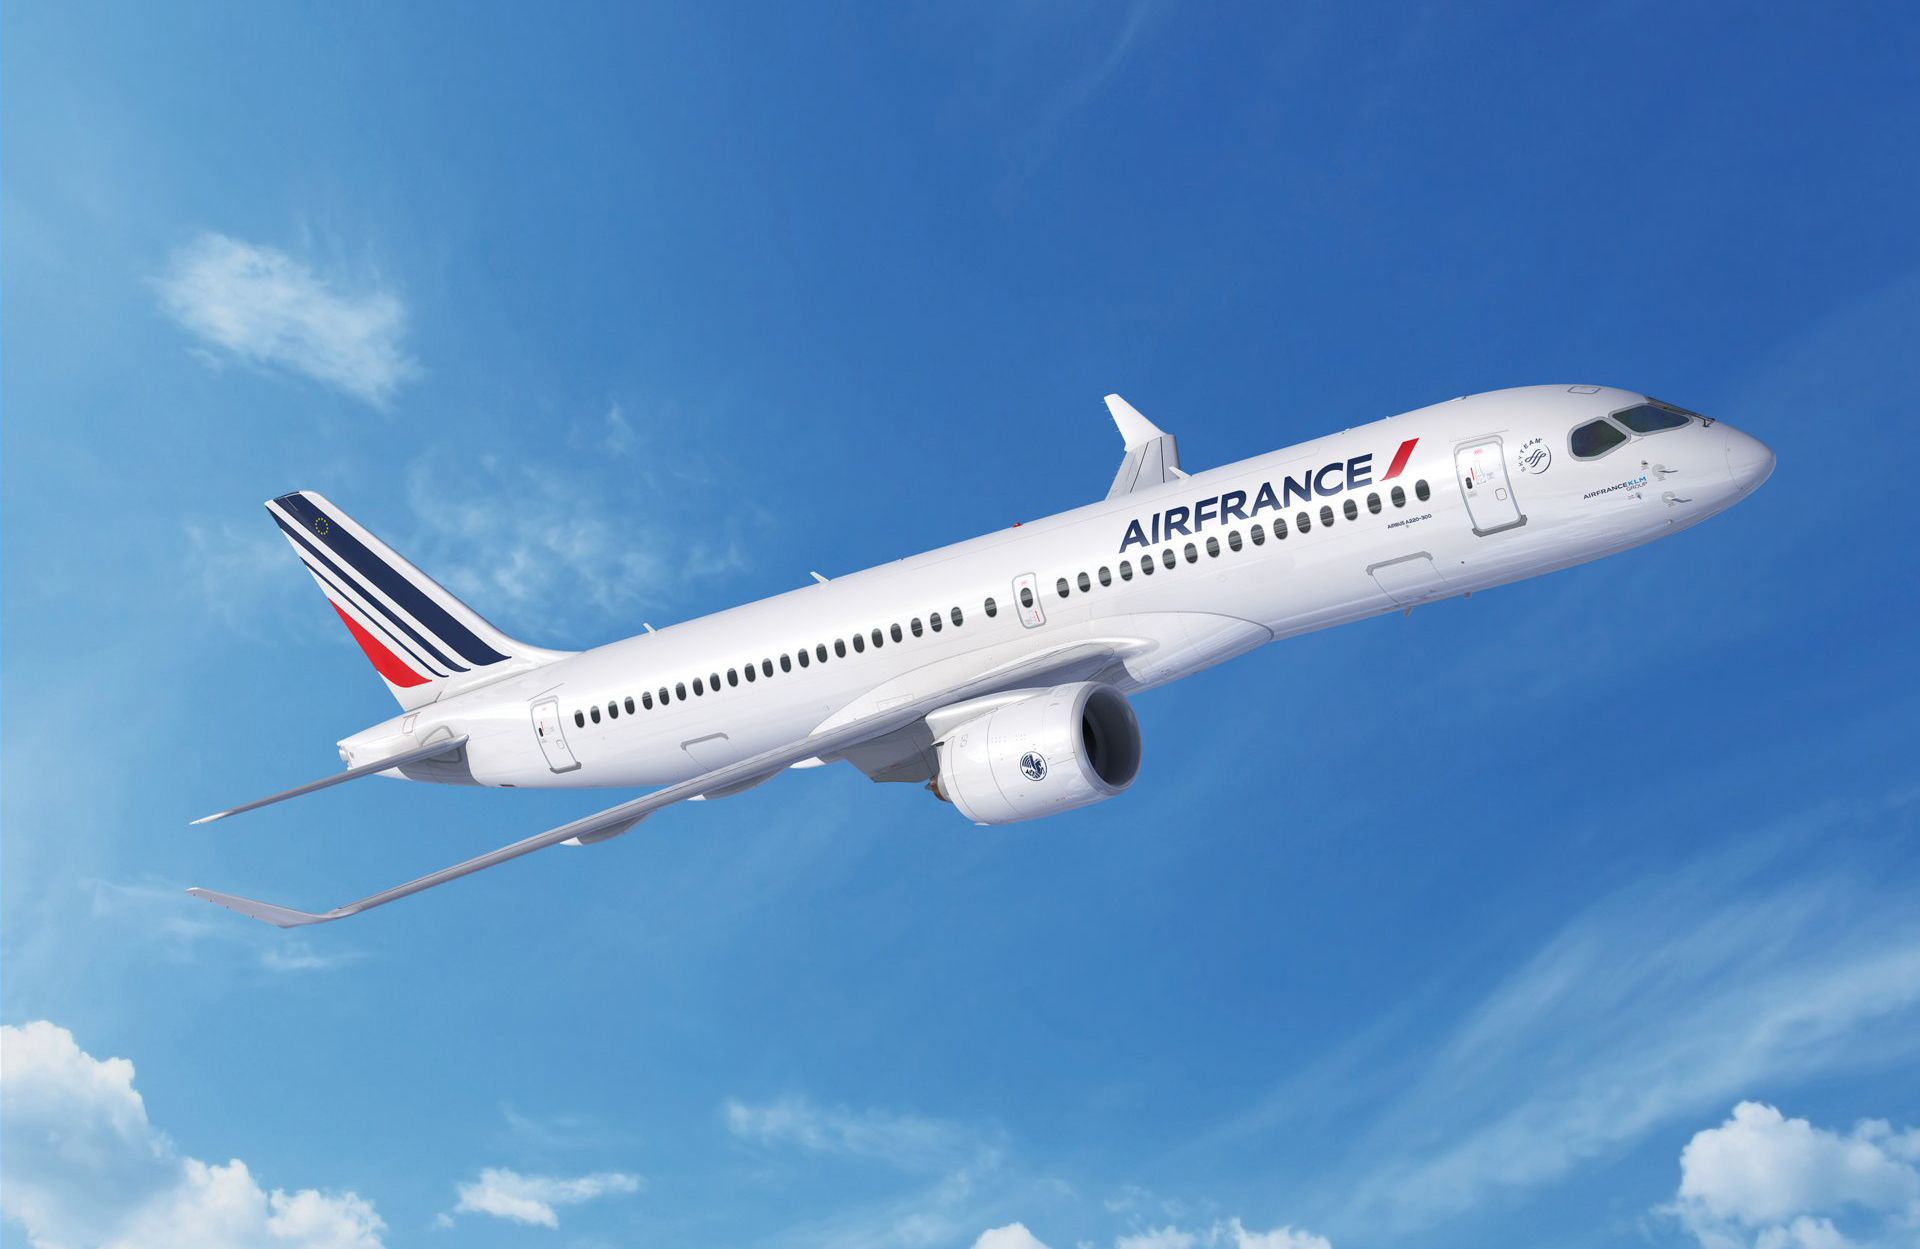 Case Study: How Air France boosts performance with cross-channel customer journeys